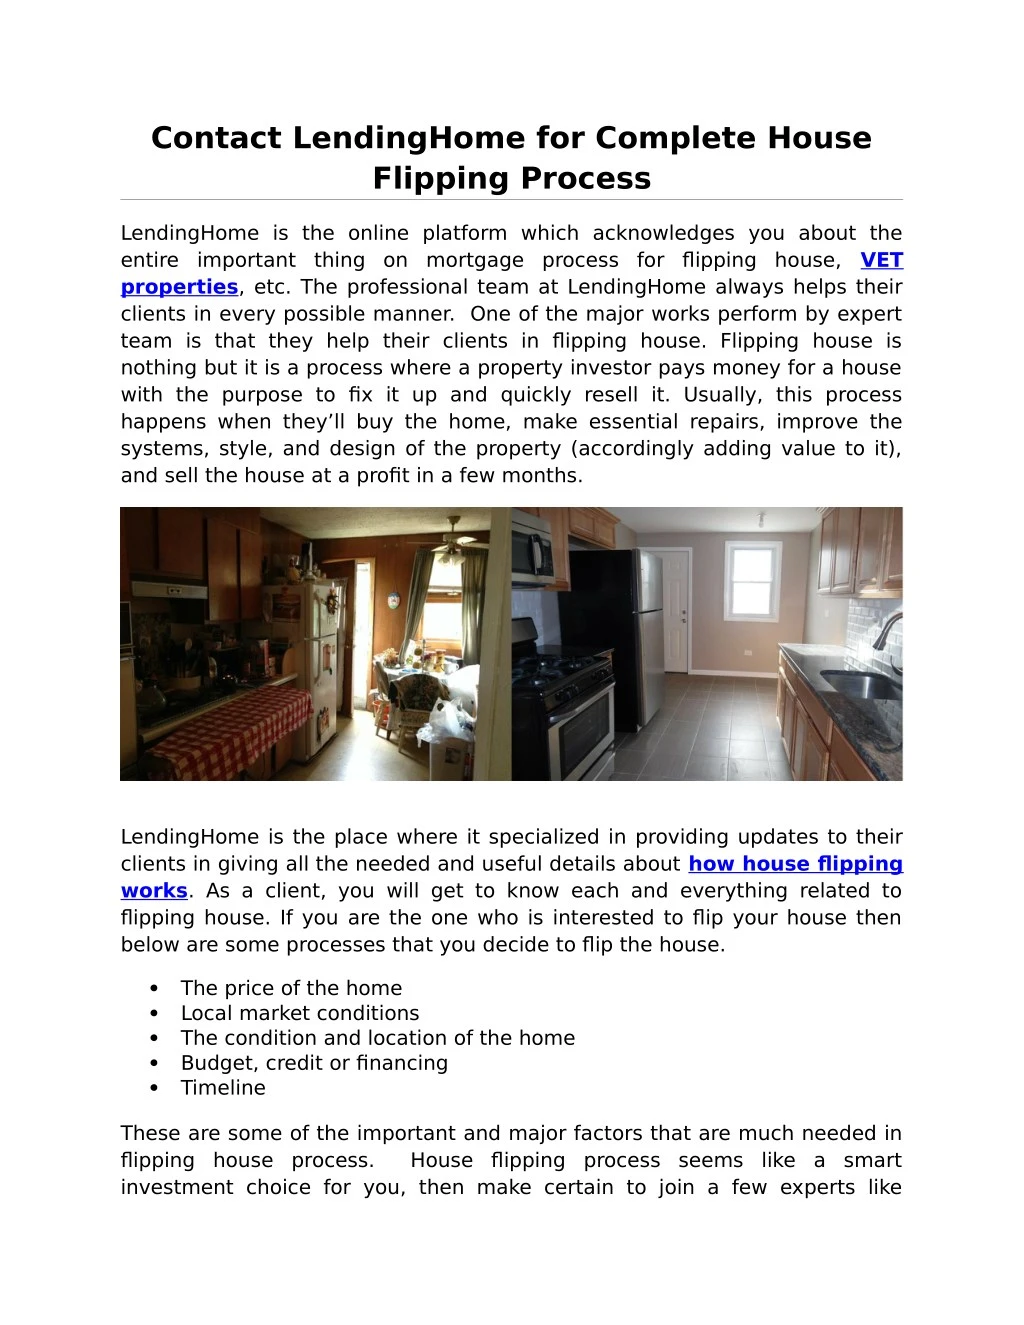 contact lendinghome for complete house flipping